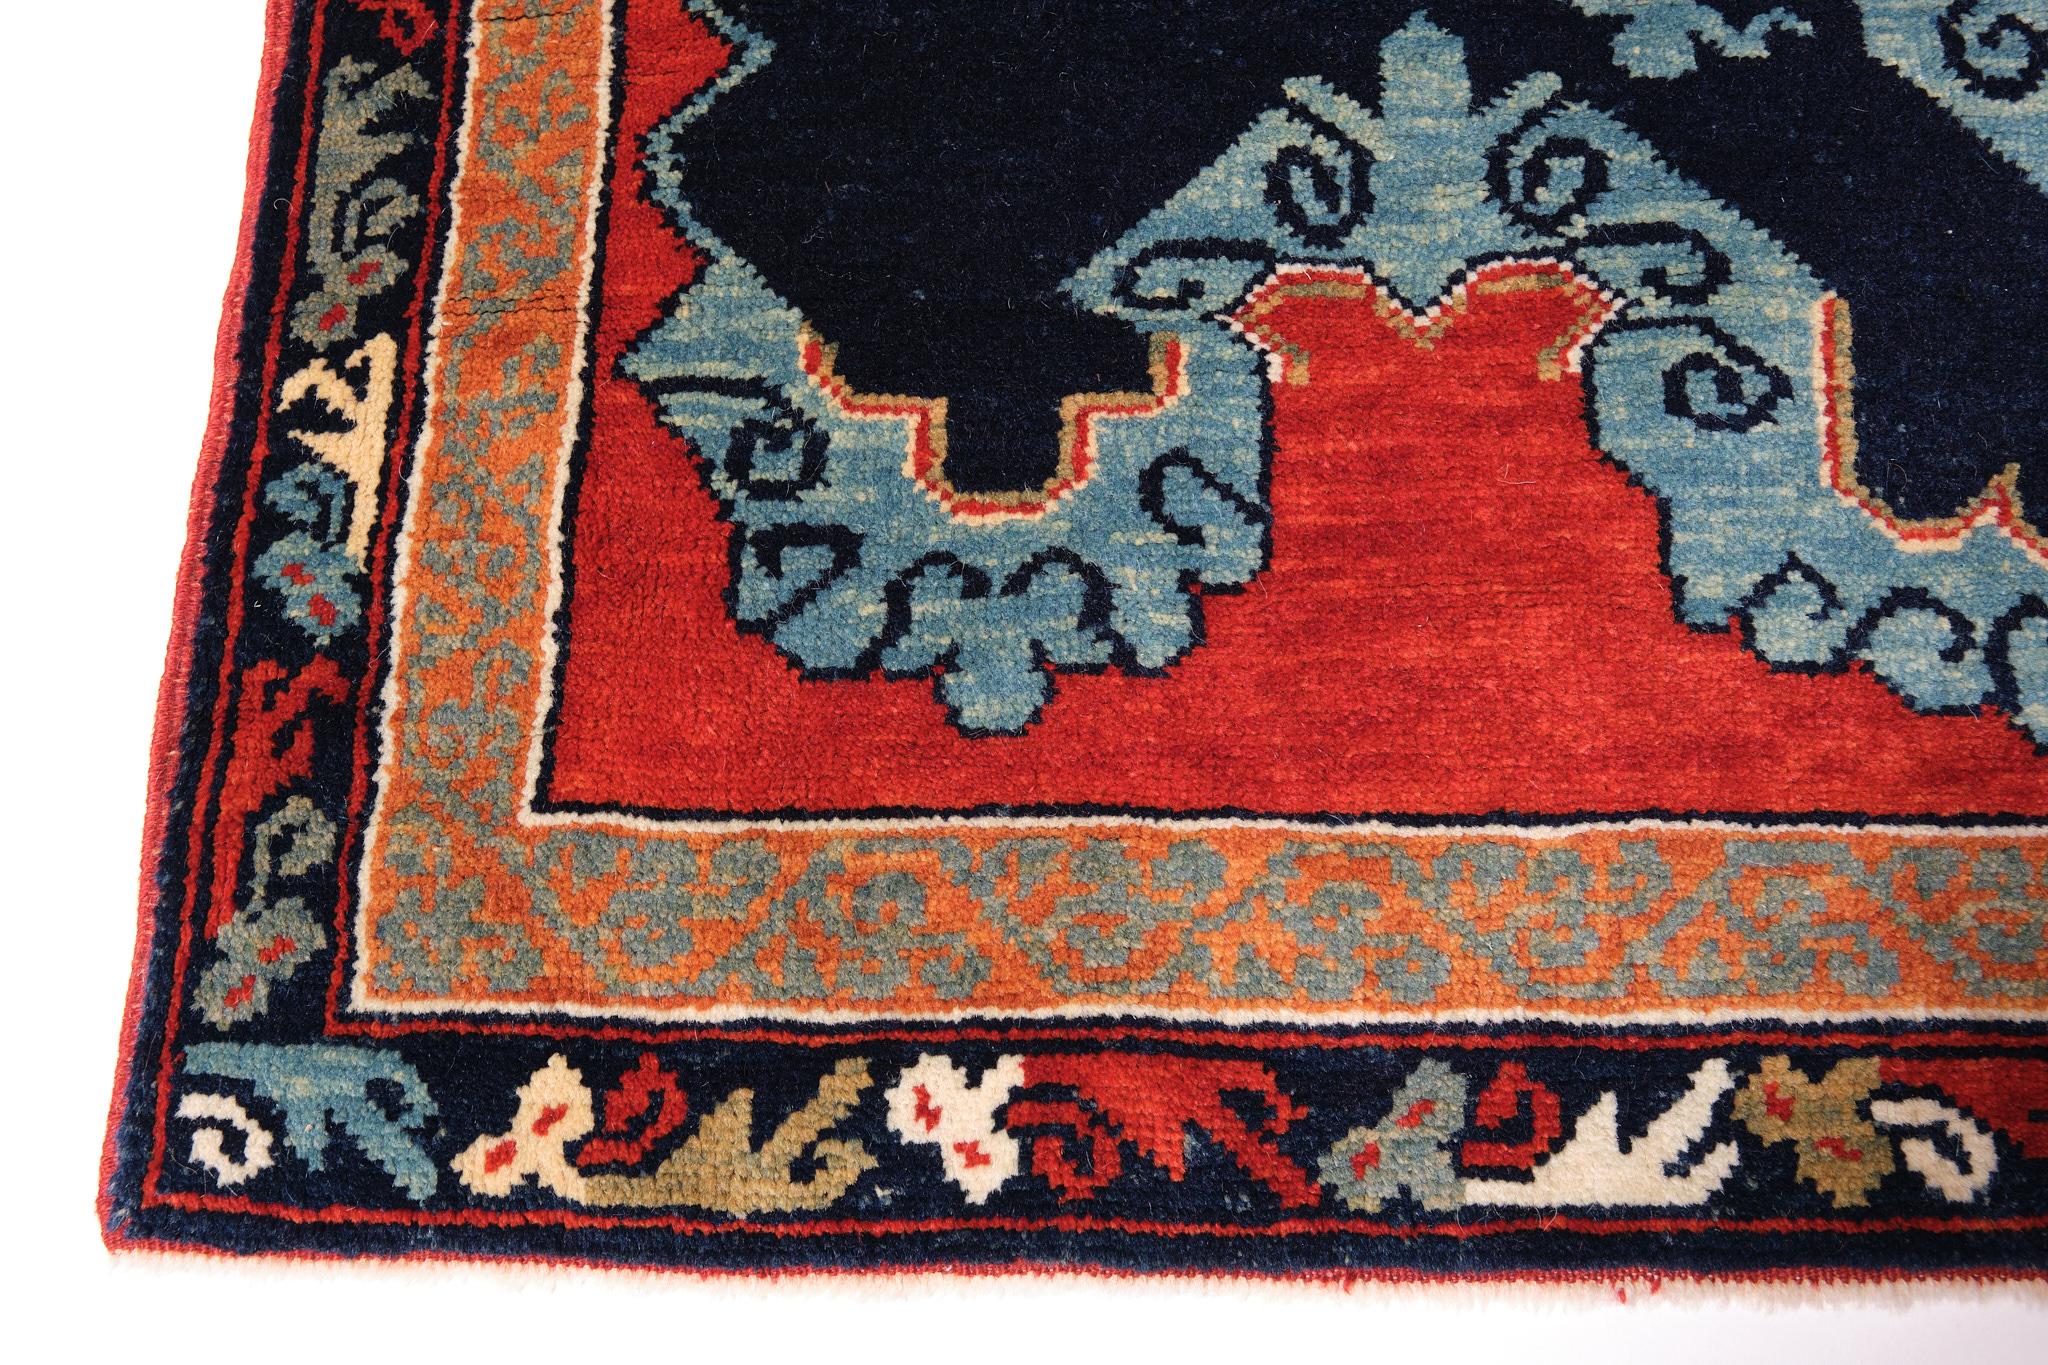 The source of the rug comes from the book Orient Stars Collection, Anatolian Tribal rugs 1050-1750, Michael Franses, Hali Publications Ltd, 2021 fig.189 and Antique Rugs from the Near East, Wilhelm von Bode and Ernst Kühnel, Klinkhardt & Biermann,